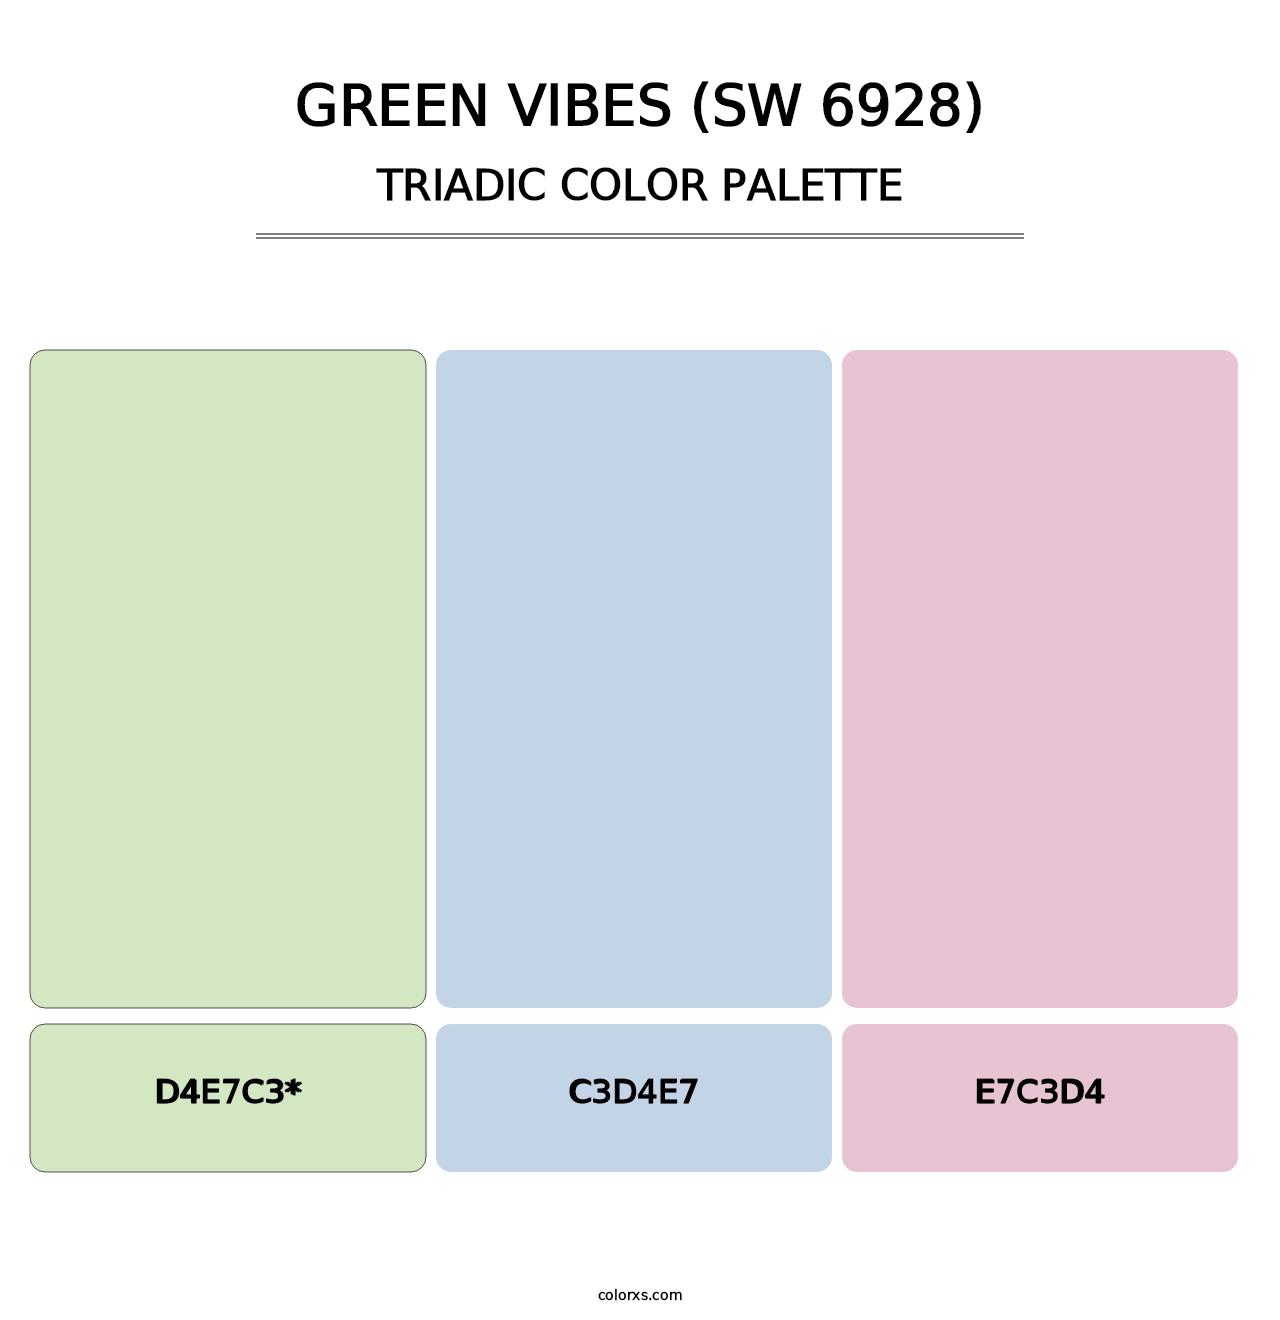 Green Vibes (SW 6928) - Triadic Color Palette